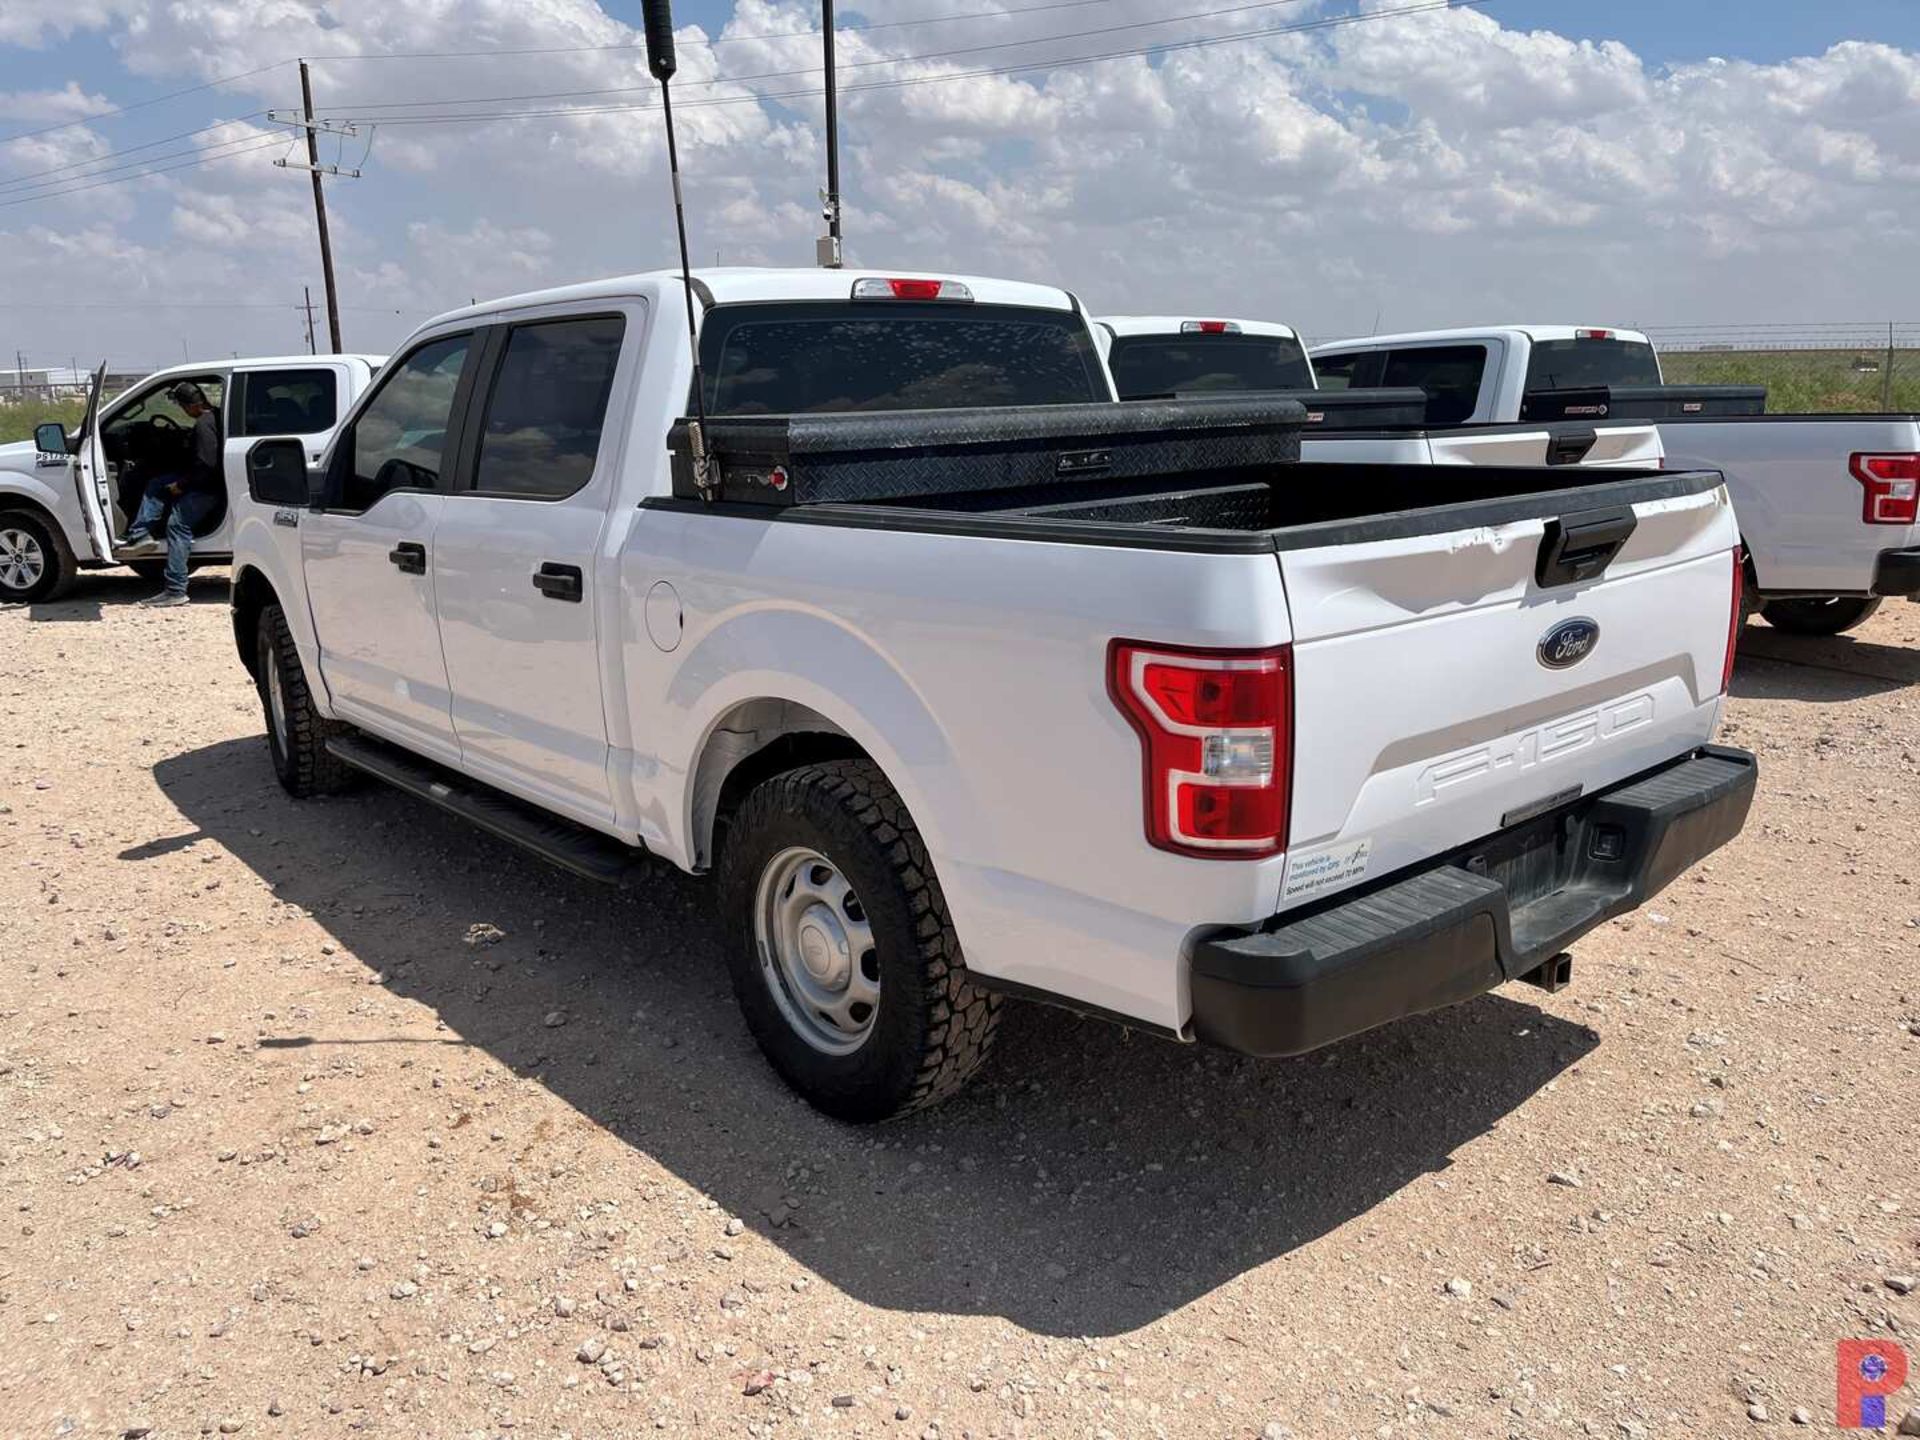 2018 FORD F150 CREW CAB PICKUP TRUCK - Image 4 of 7